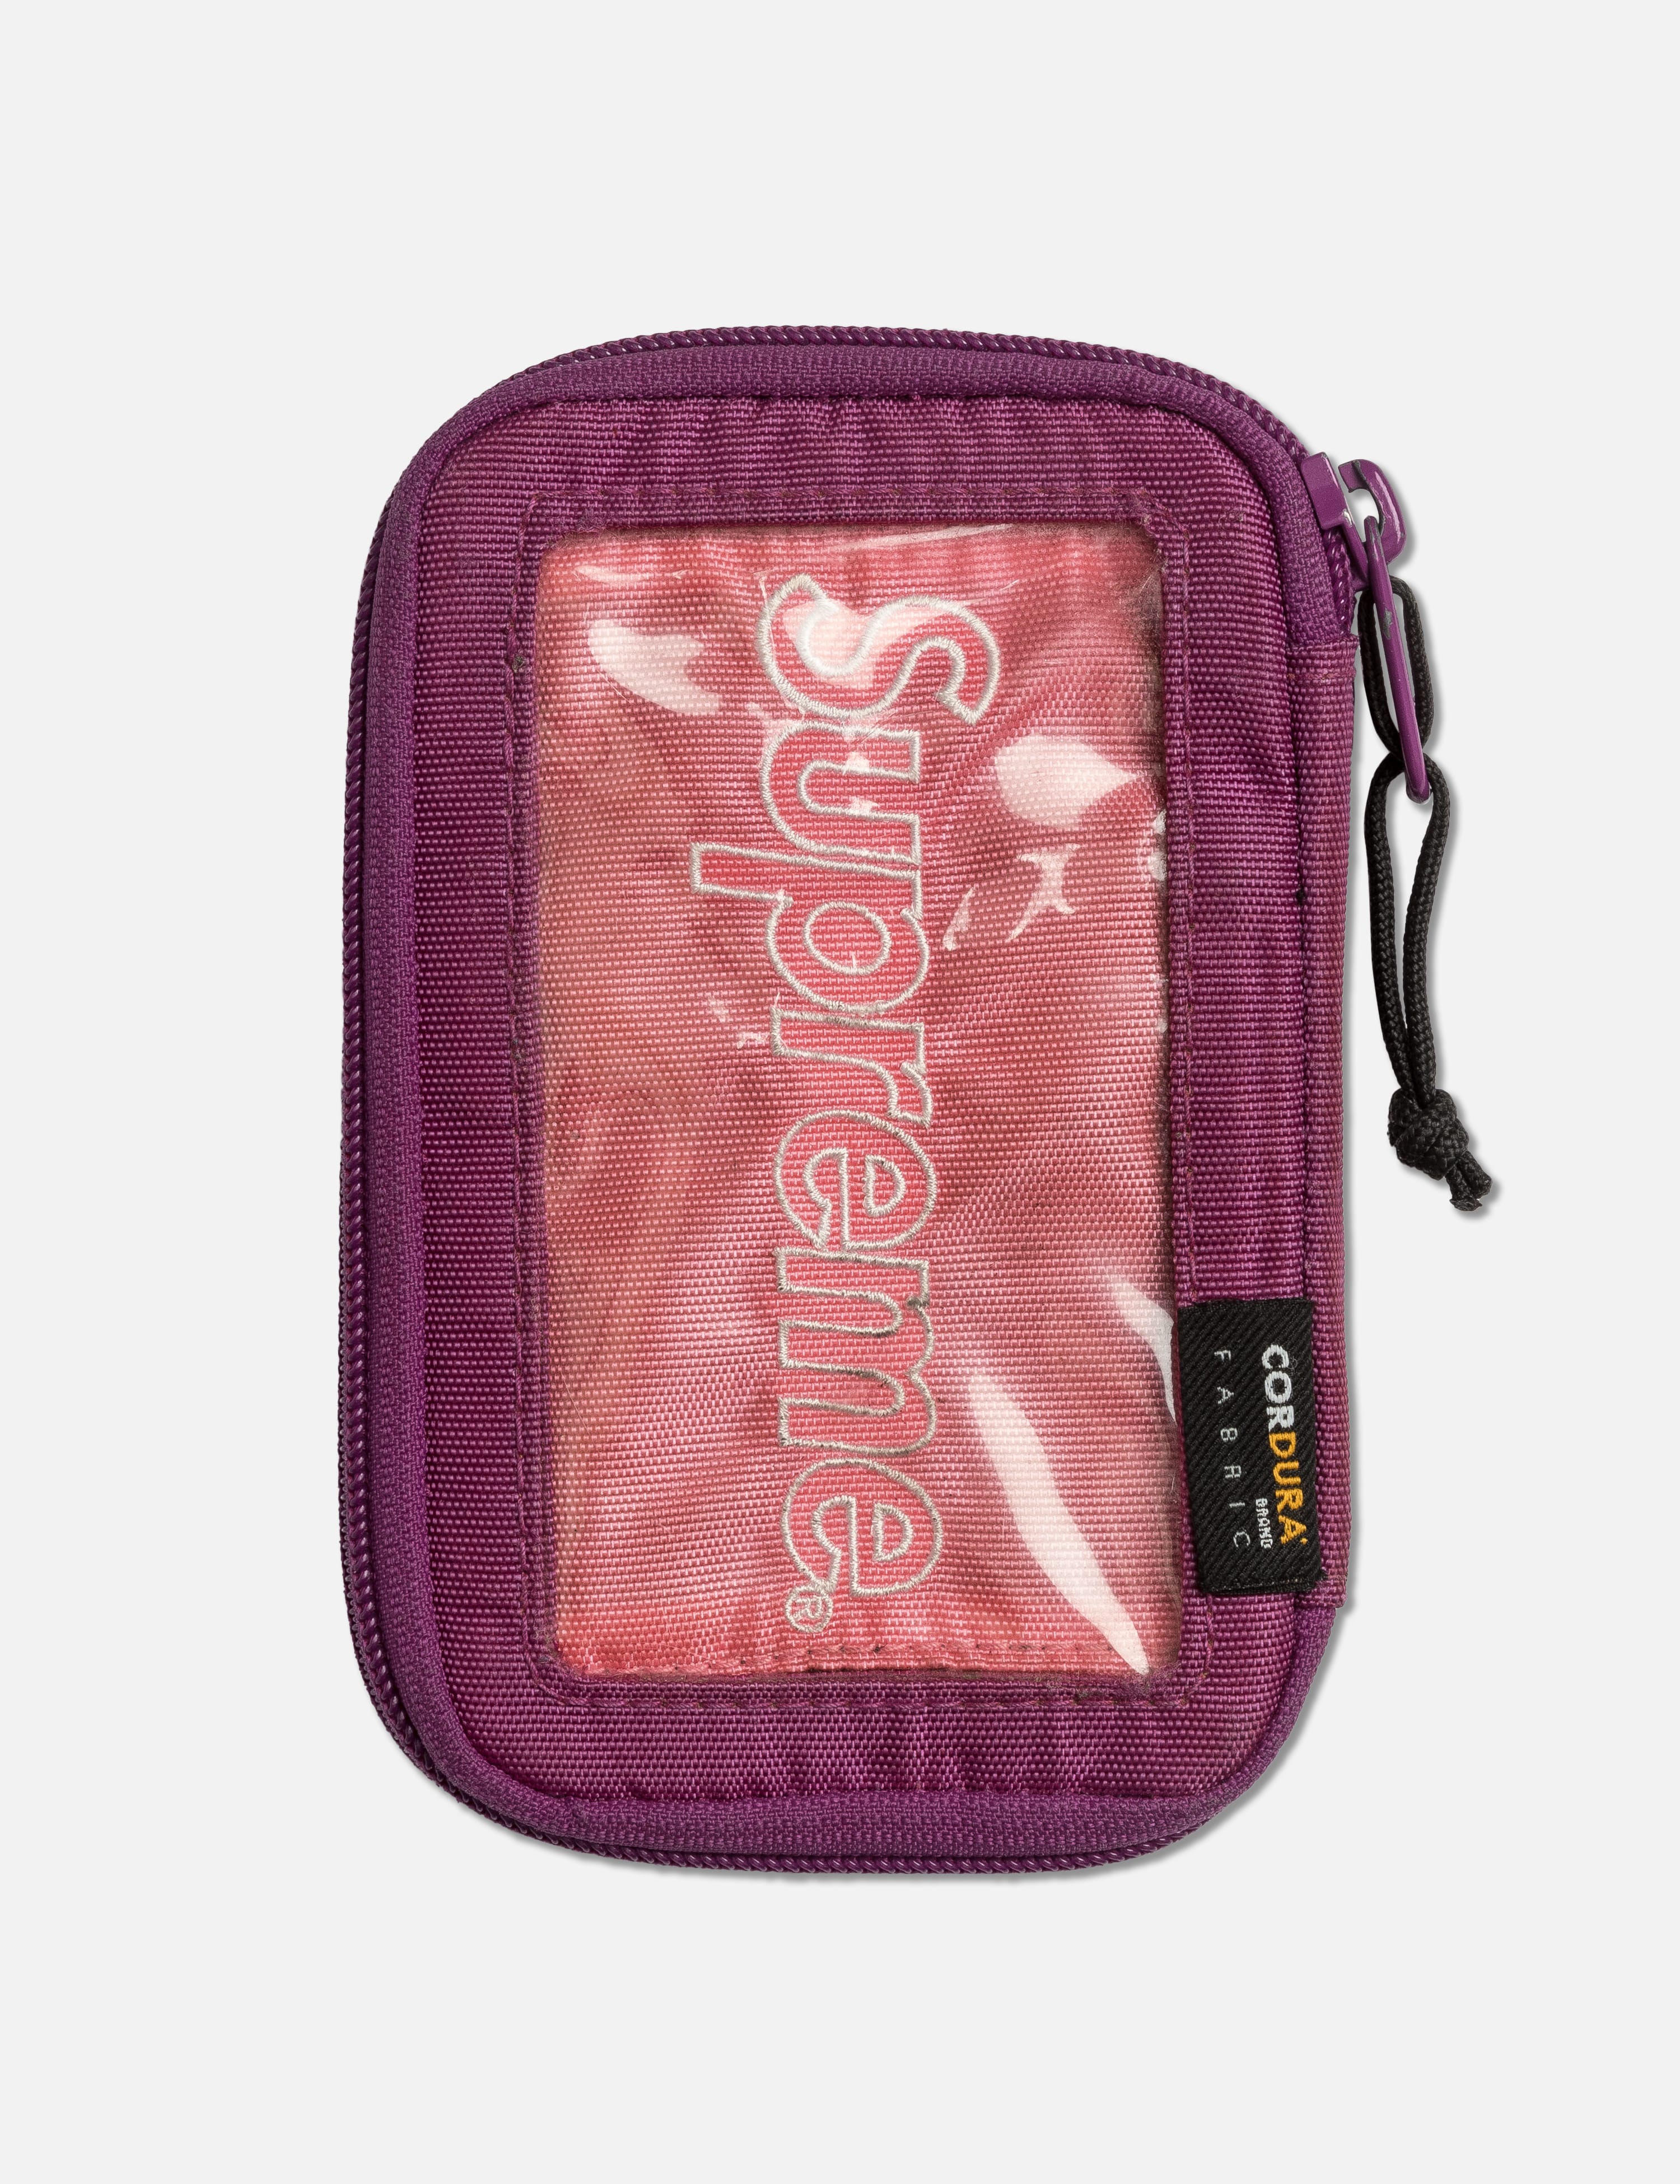 Supreme - SUPREME FW 19 SMALL ZIP POUCH | HBX - Globally Curated